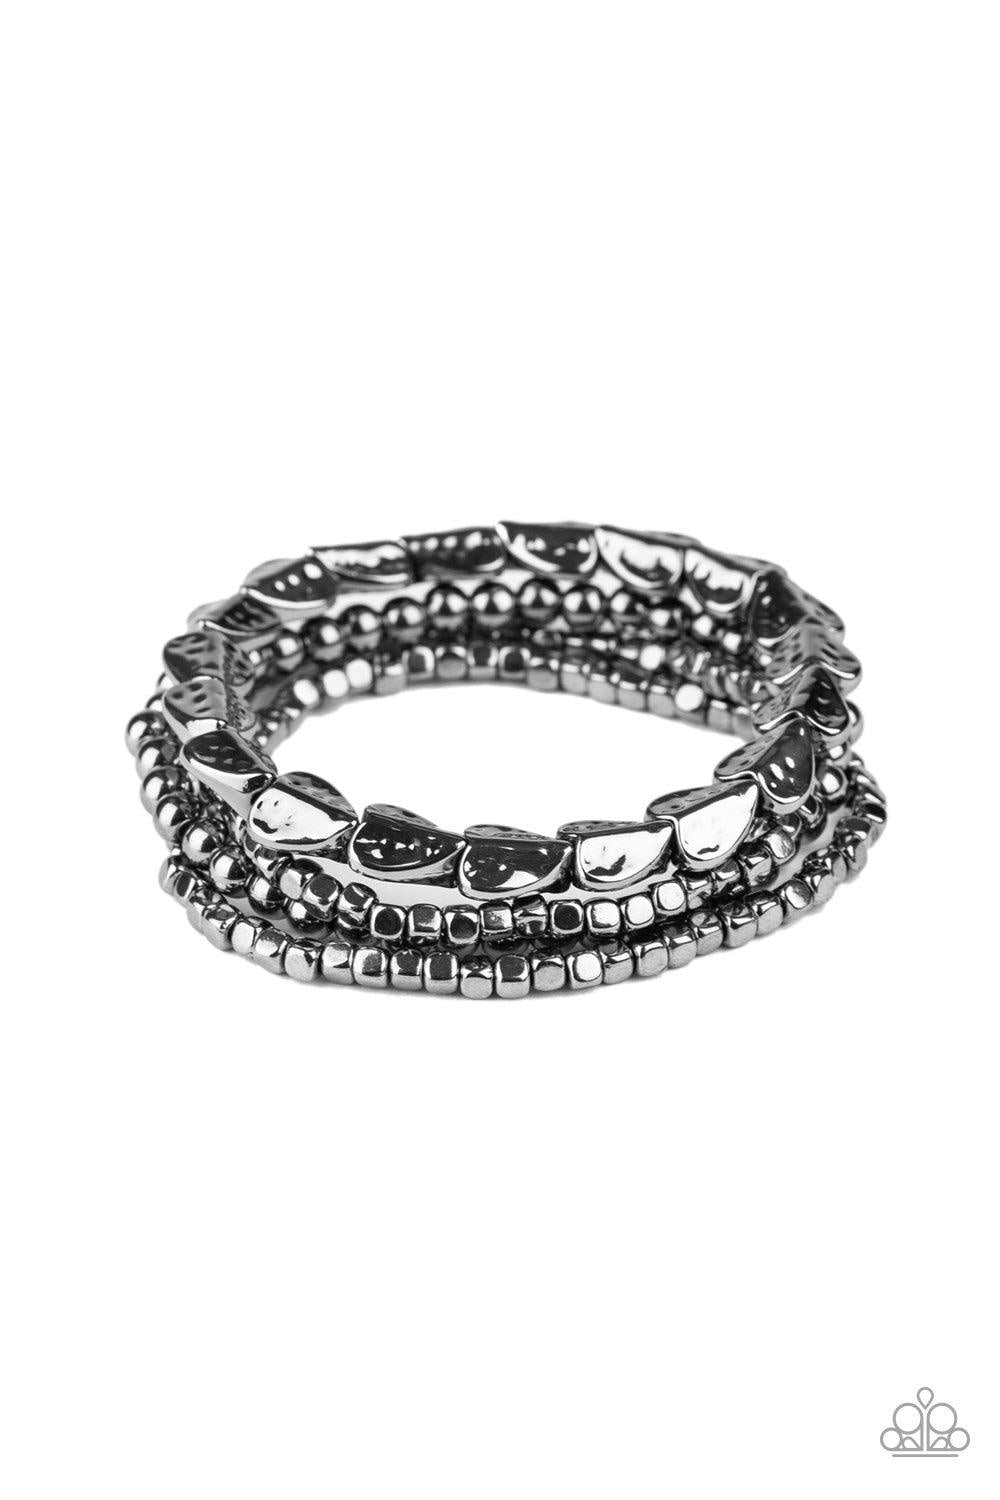 Paparazzi Accessories Ancient Heirloom - Black A collection of gunmetal cubes, classic gunmetal beads, and hammered spade-like beading is threaded along stretchy bands around the wrist for a boldly stacked look. Jewelry